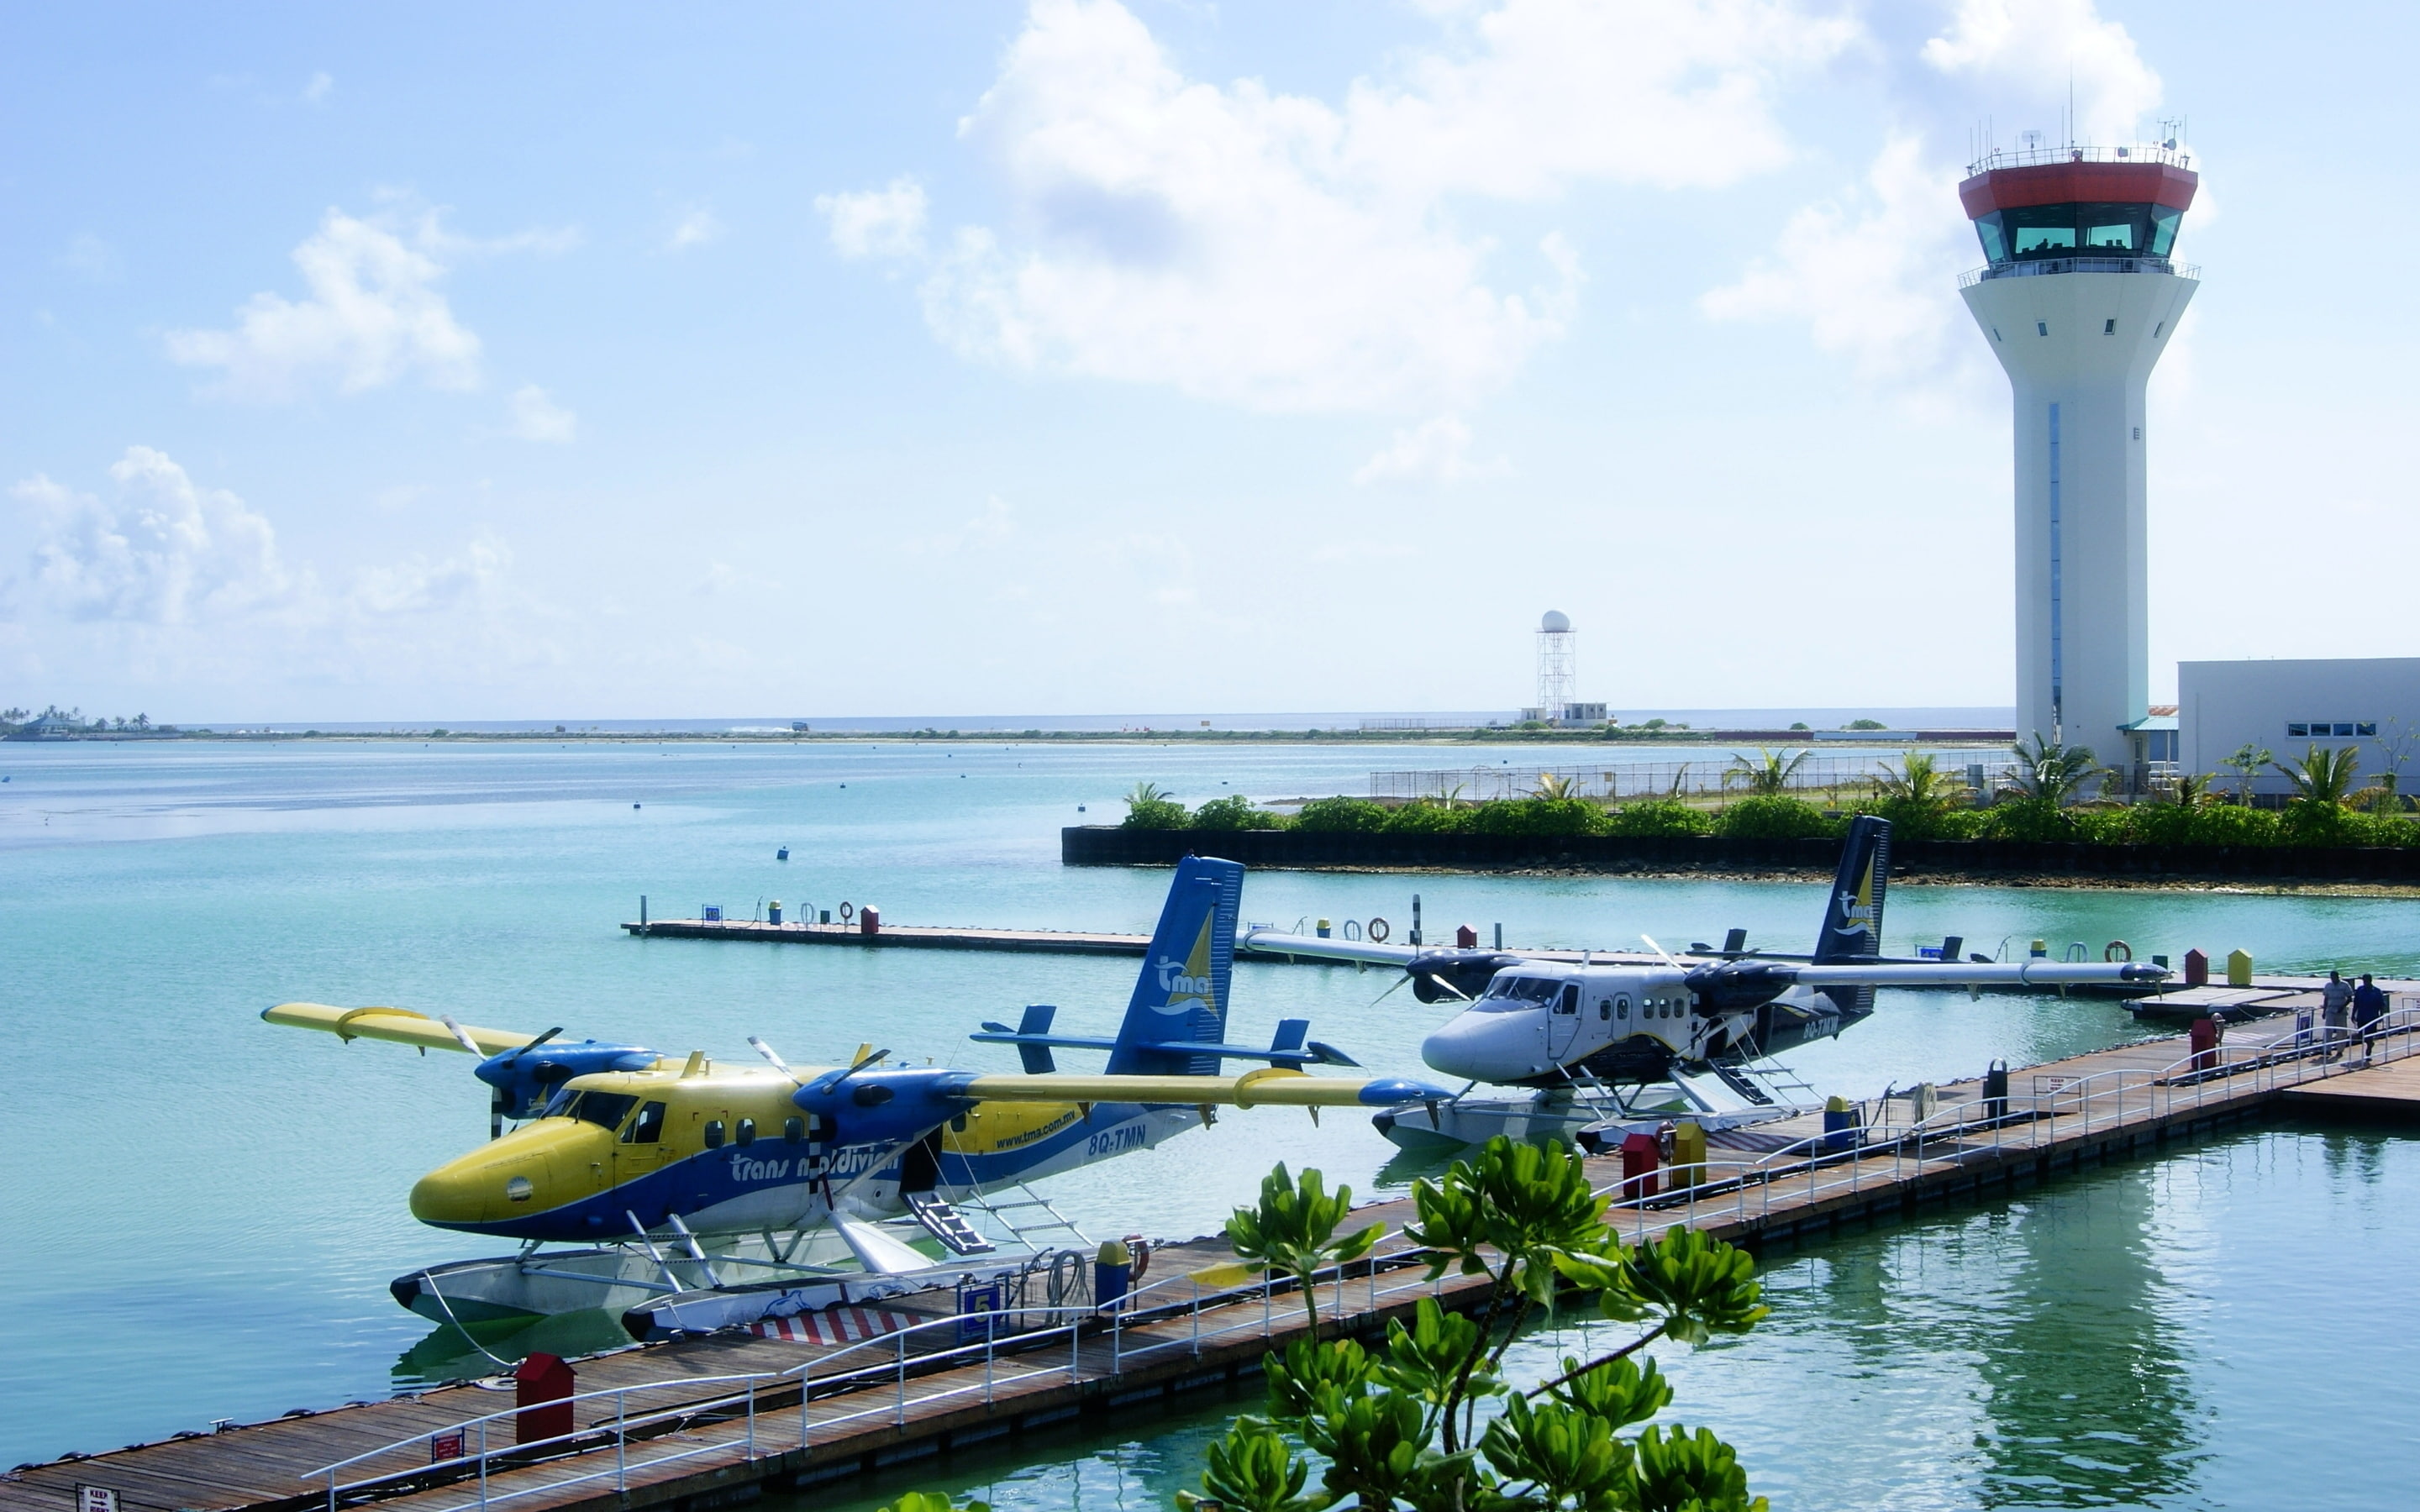 Maldives Airport, aircraft docked on water bay during day time